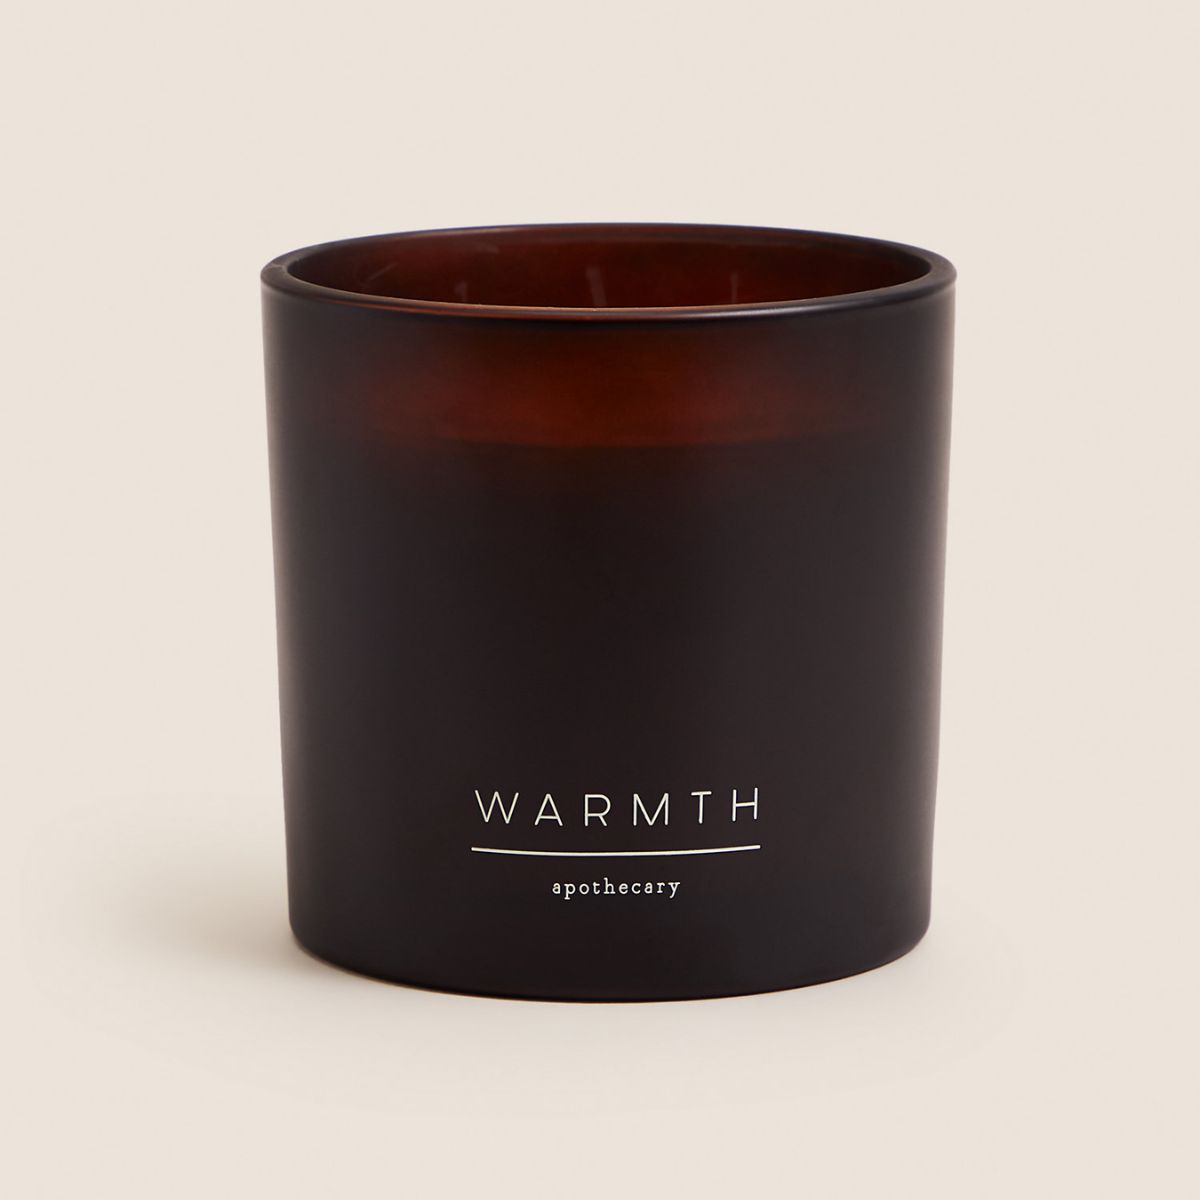 M&S Apothecary Warmth 3 Wick Candle